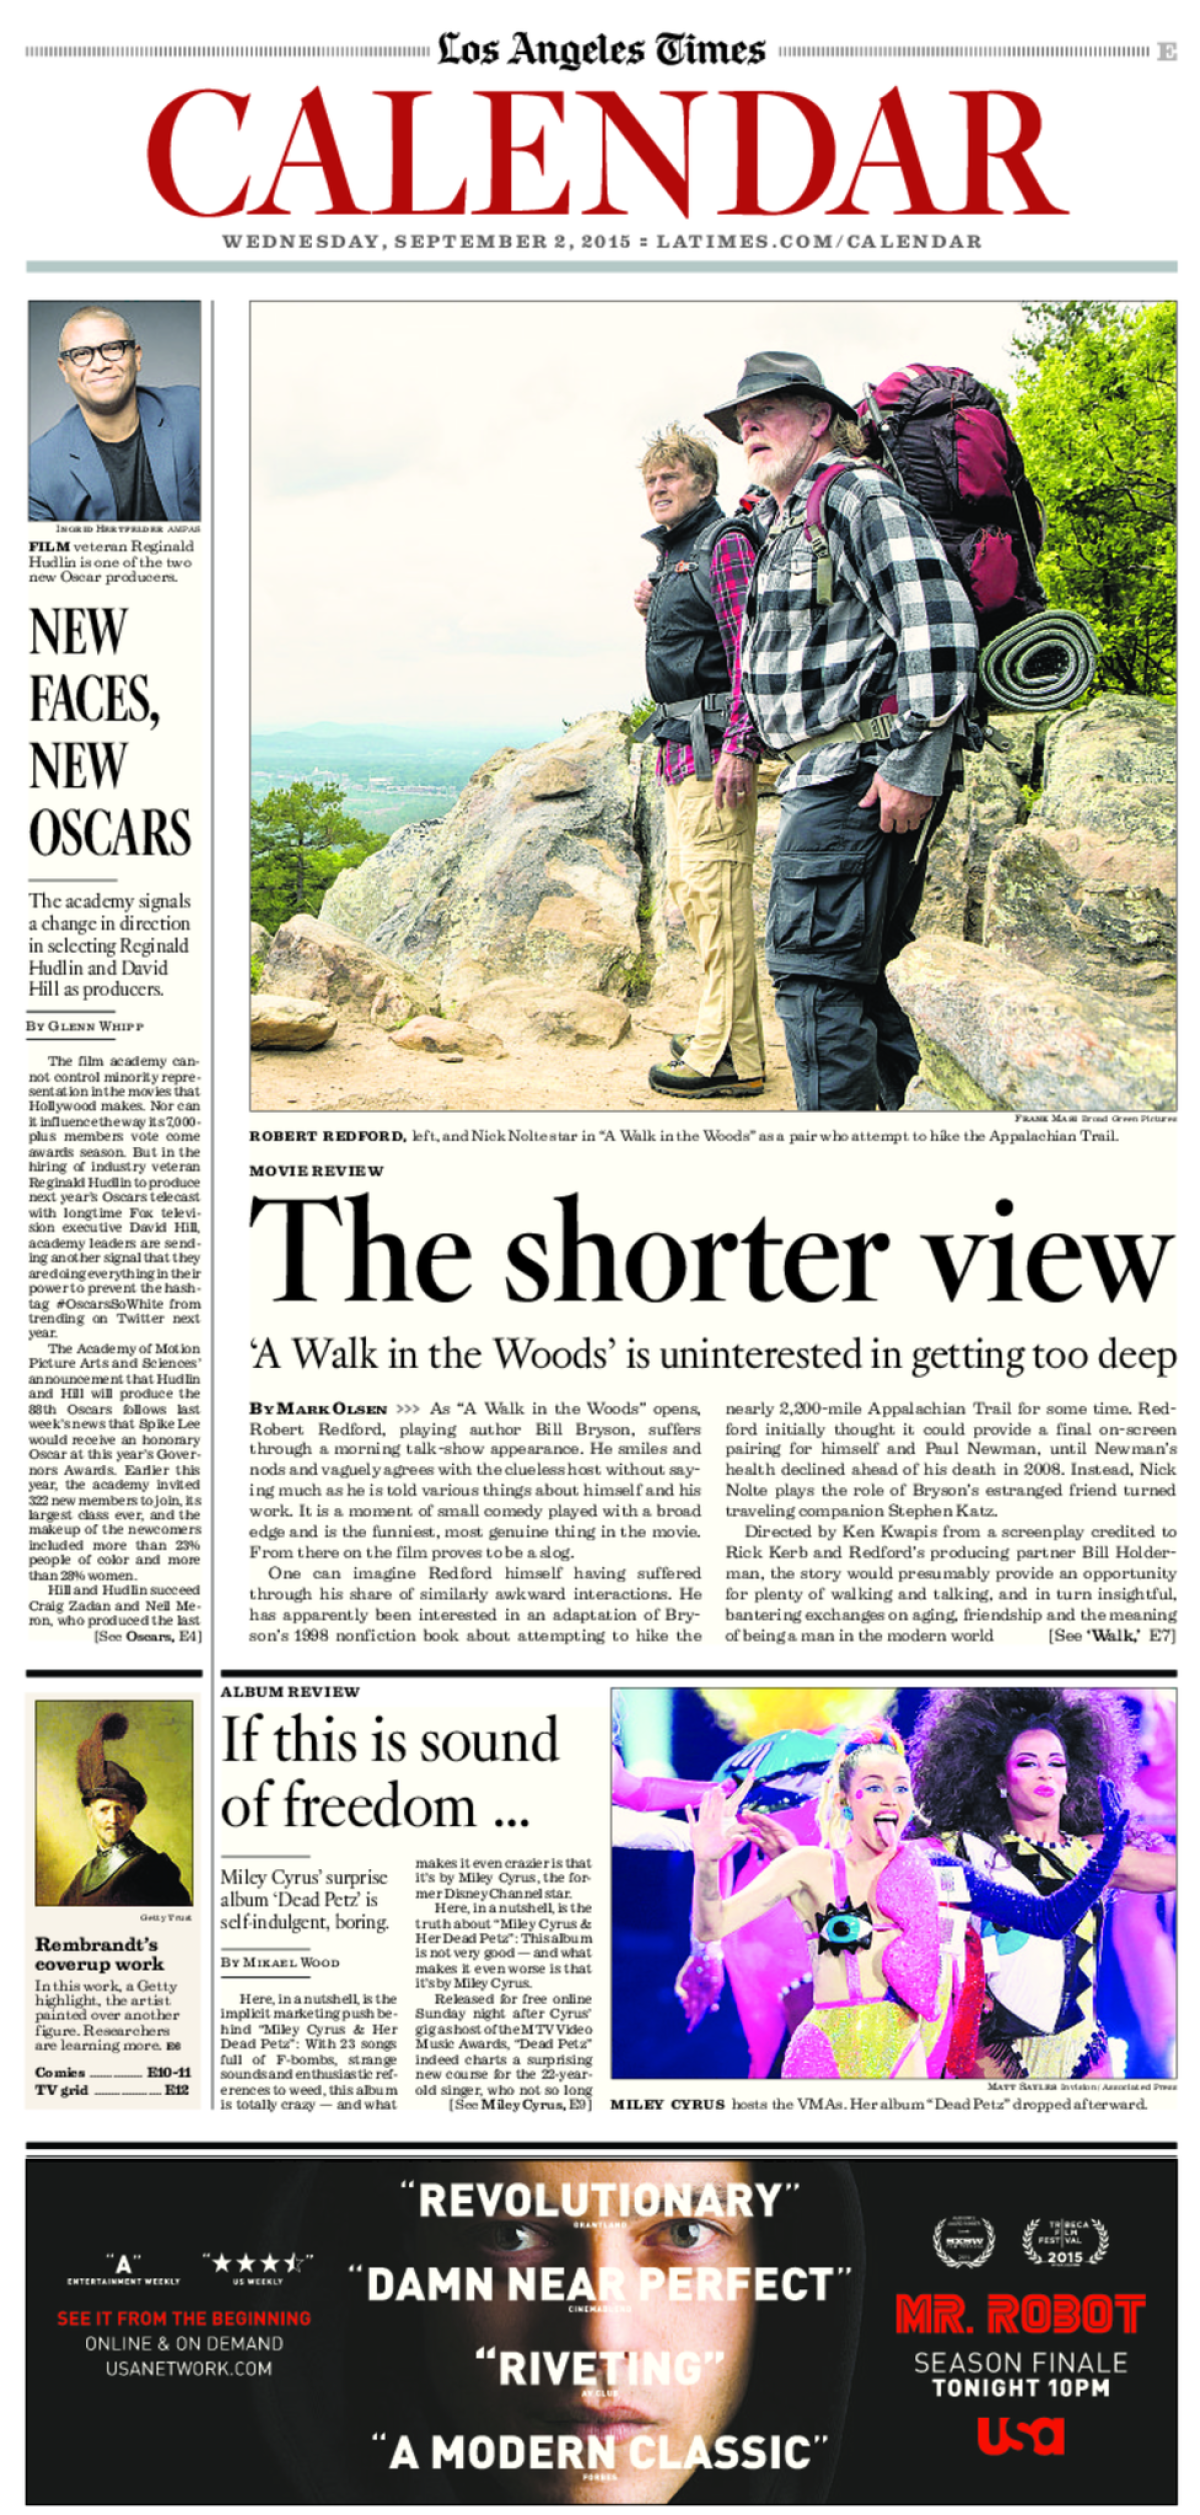 The front page